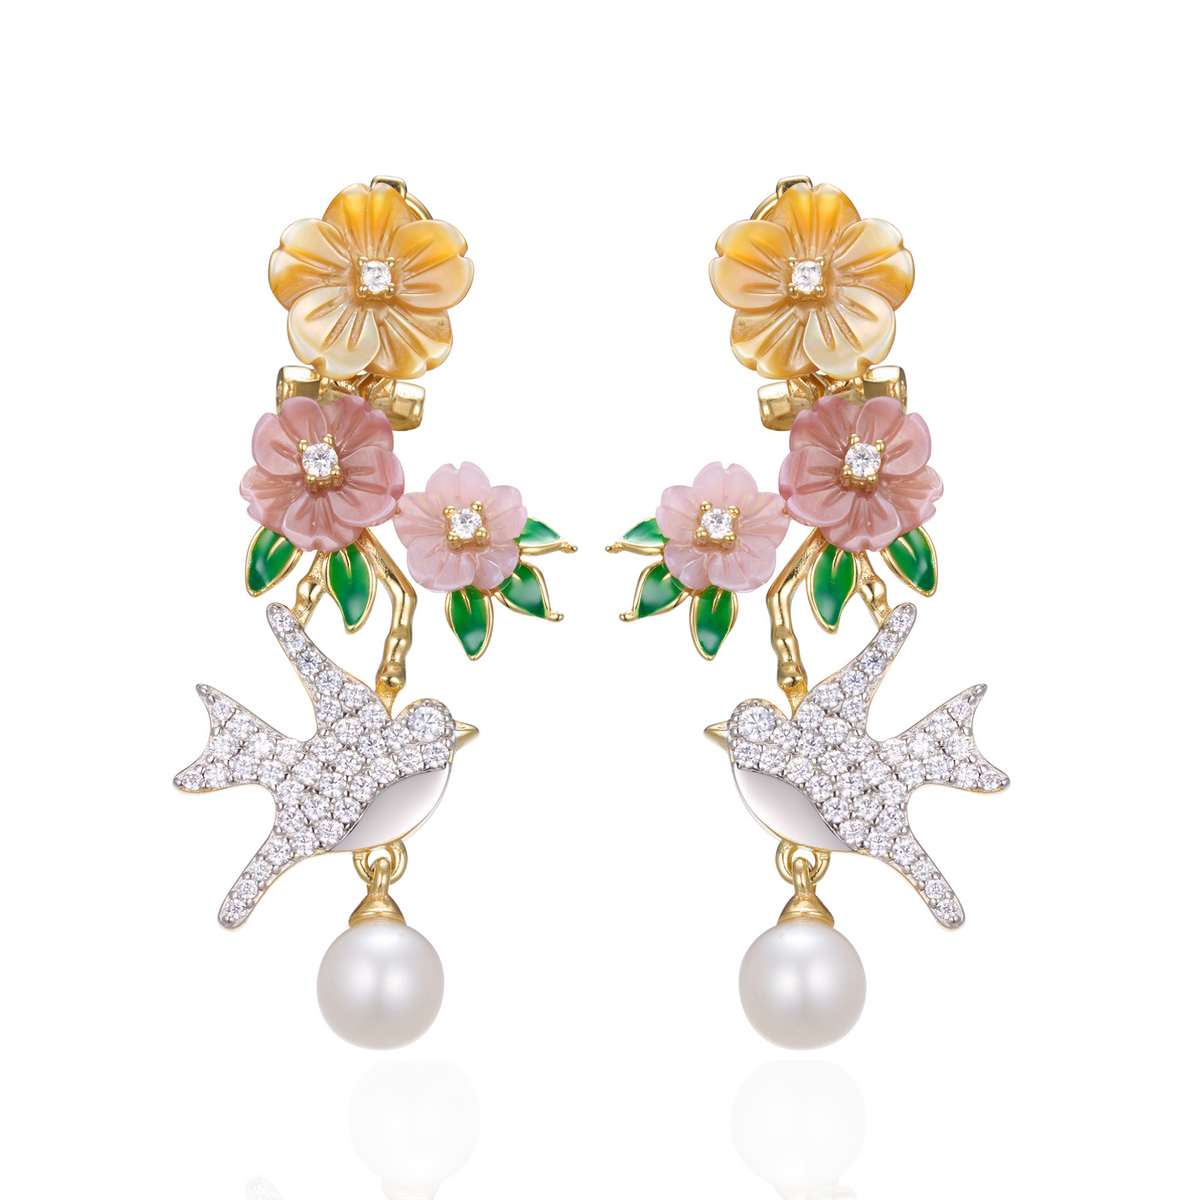 A pair of gold plated earrings with pearls, green stones, yellow, purple, pink shell flowers and a bird charm.